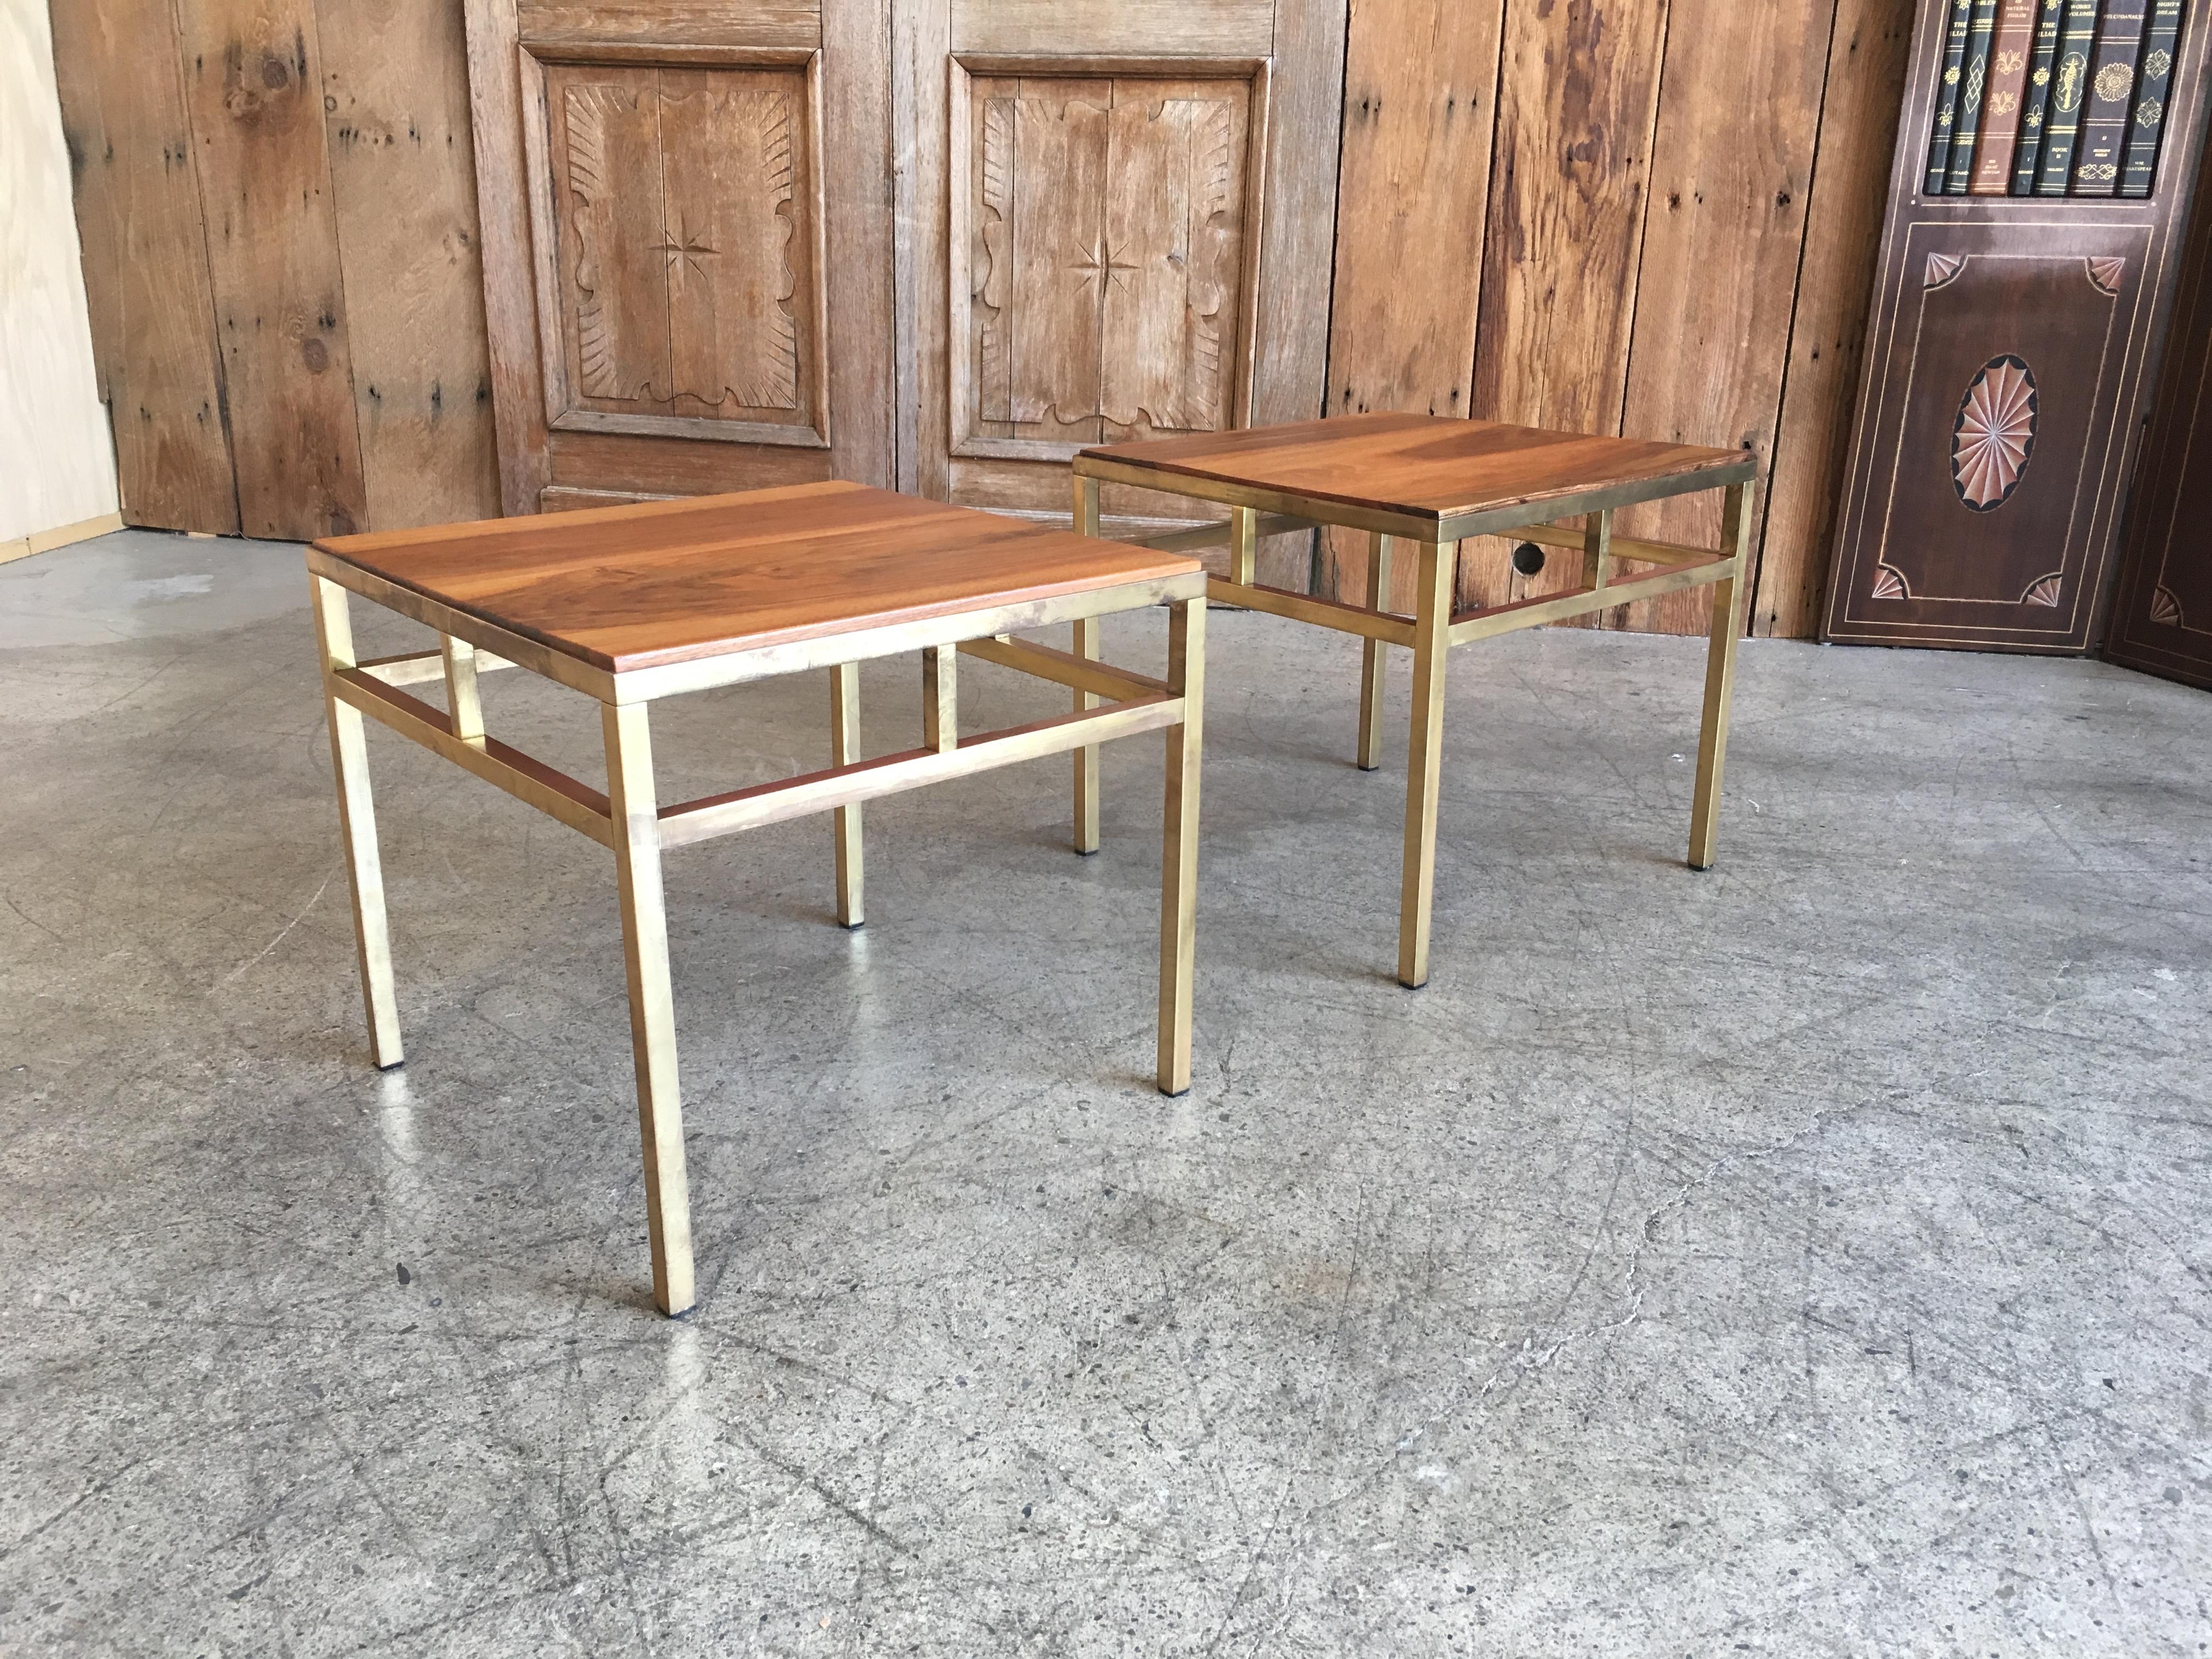 Pair of solid brass angular side tables with solid walnut tops.